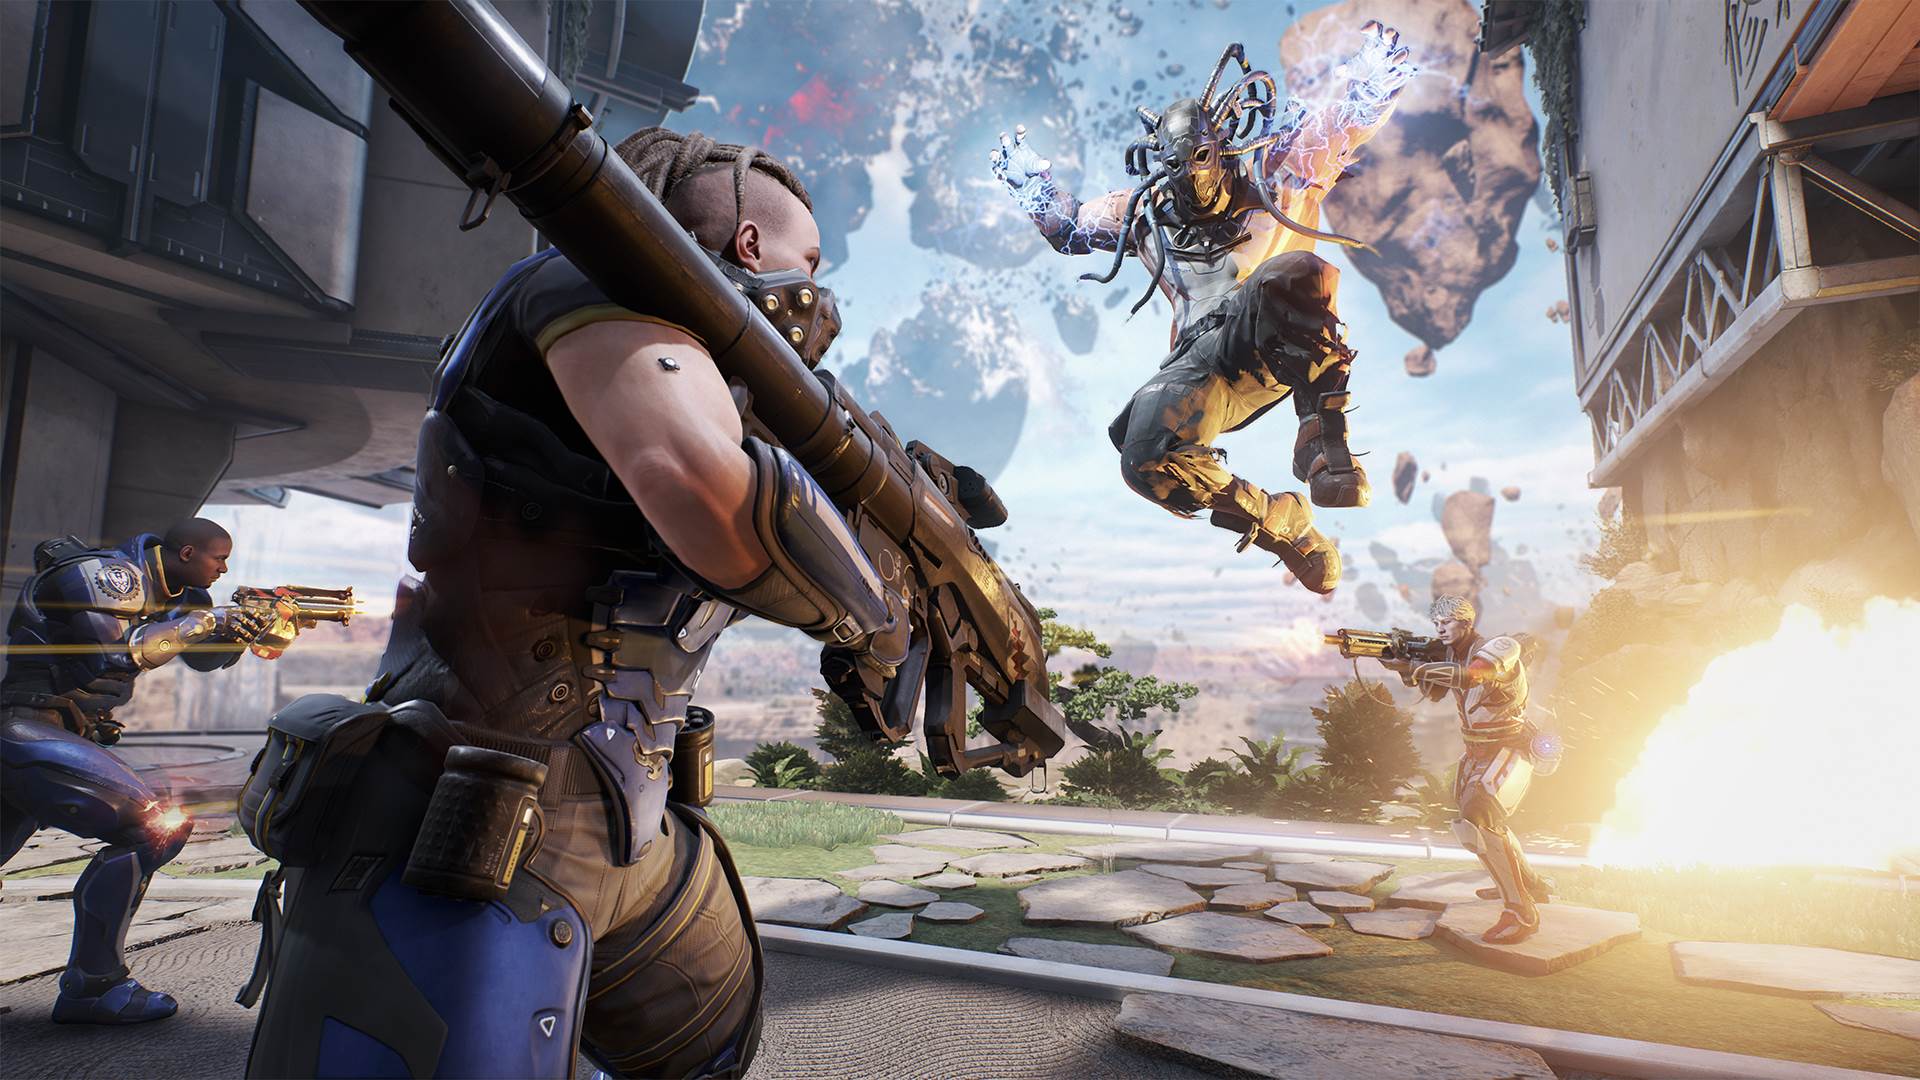 Preview: LawBreakers is the best shooter I've played in ages